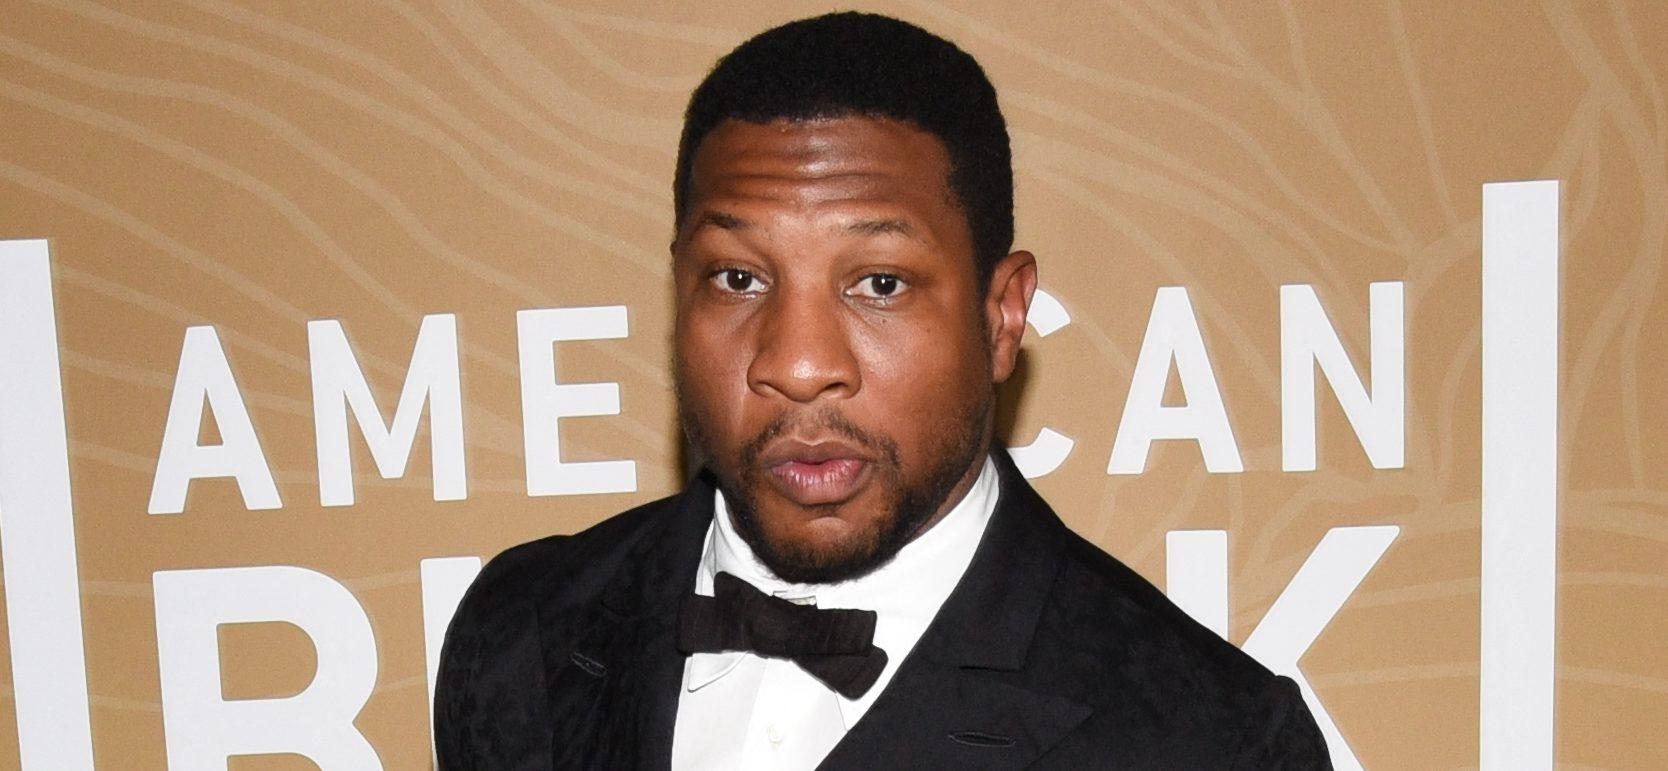 Jonathan Majors Refutes Assault Allegations, Lawyer Claims There Is Evidence To Prove Innocence